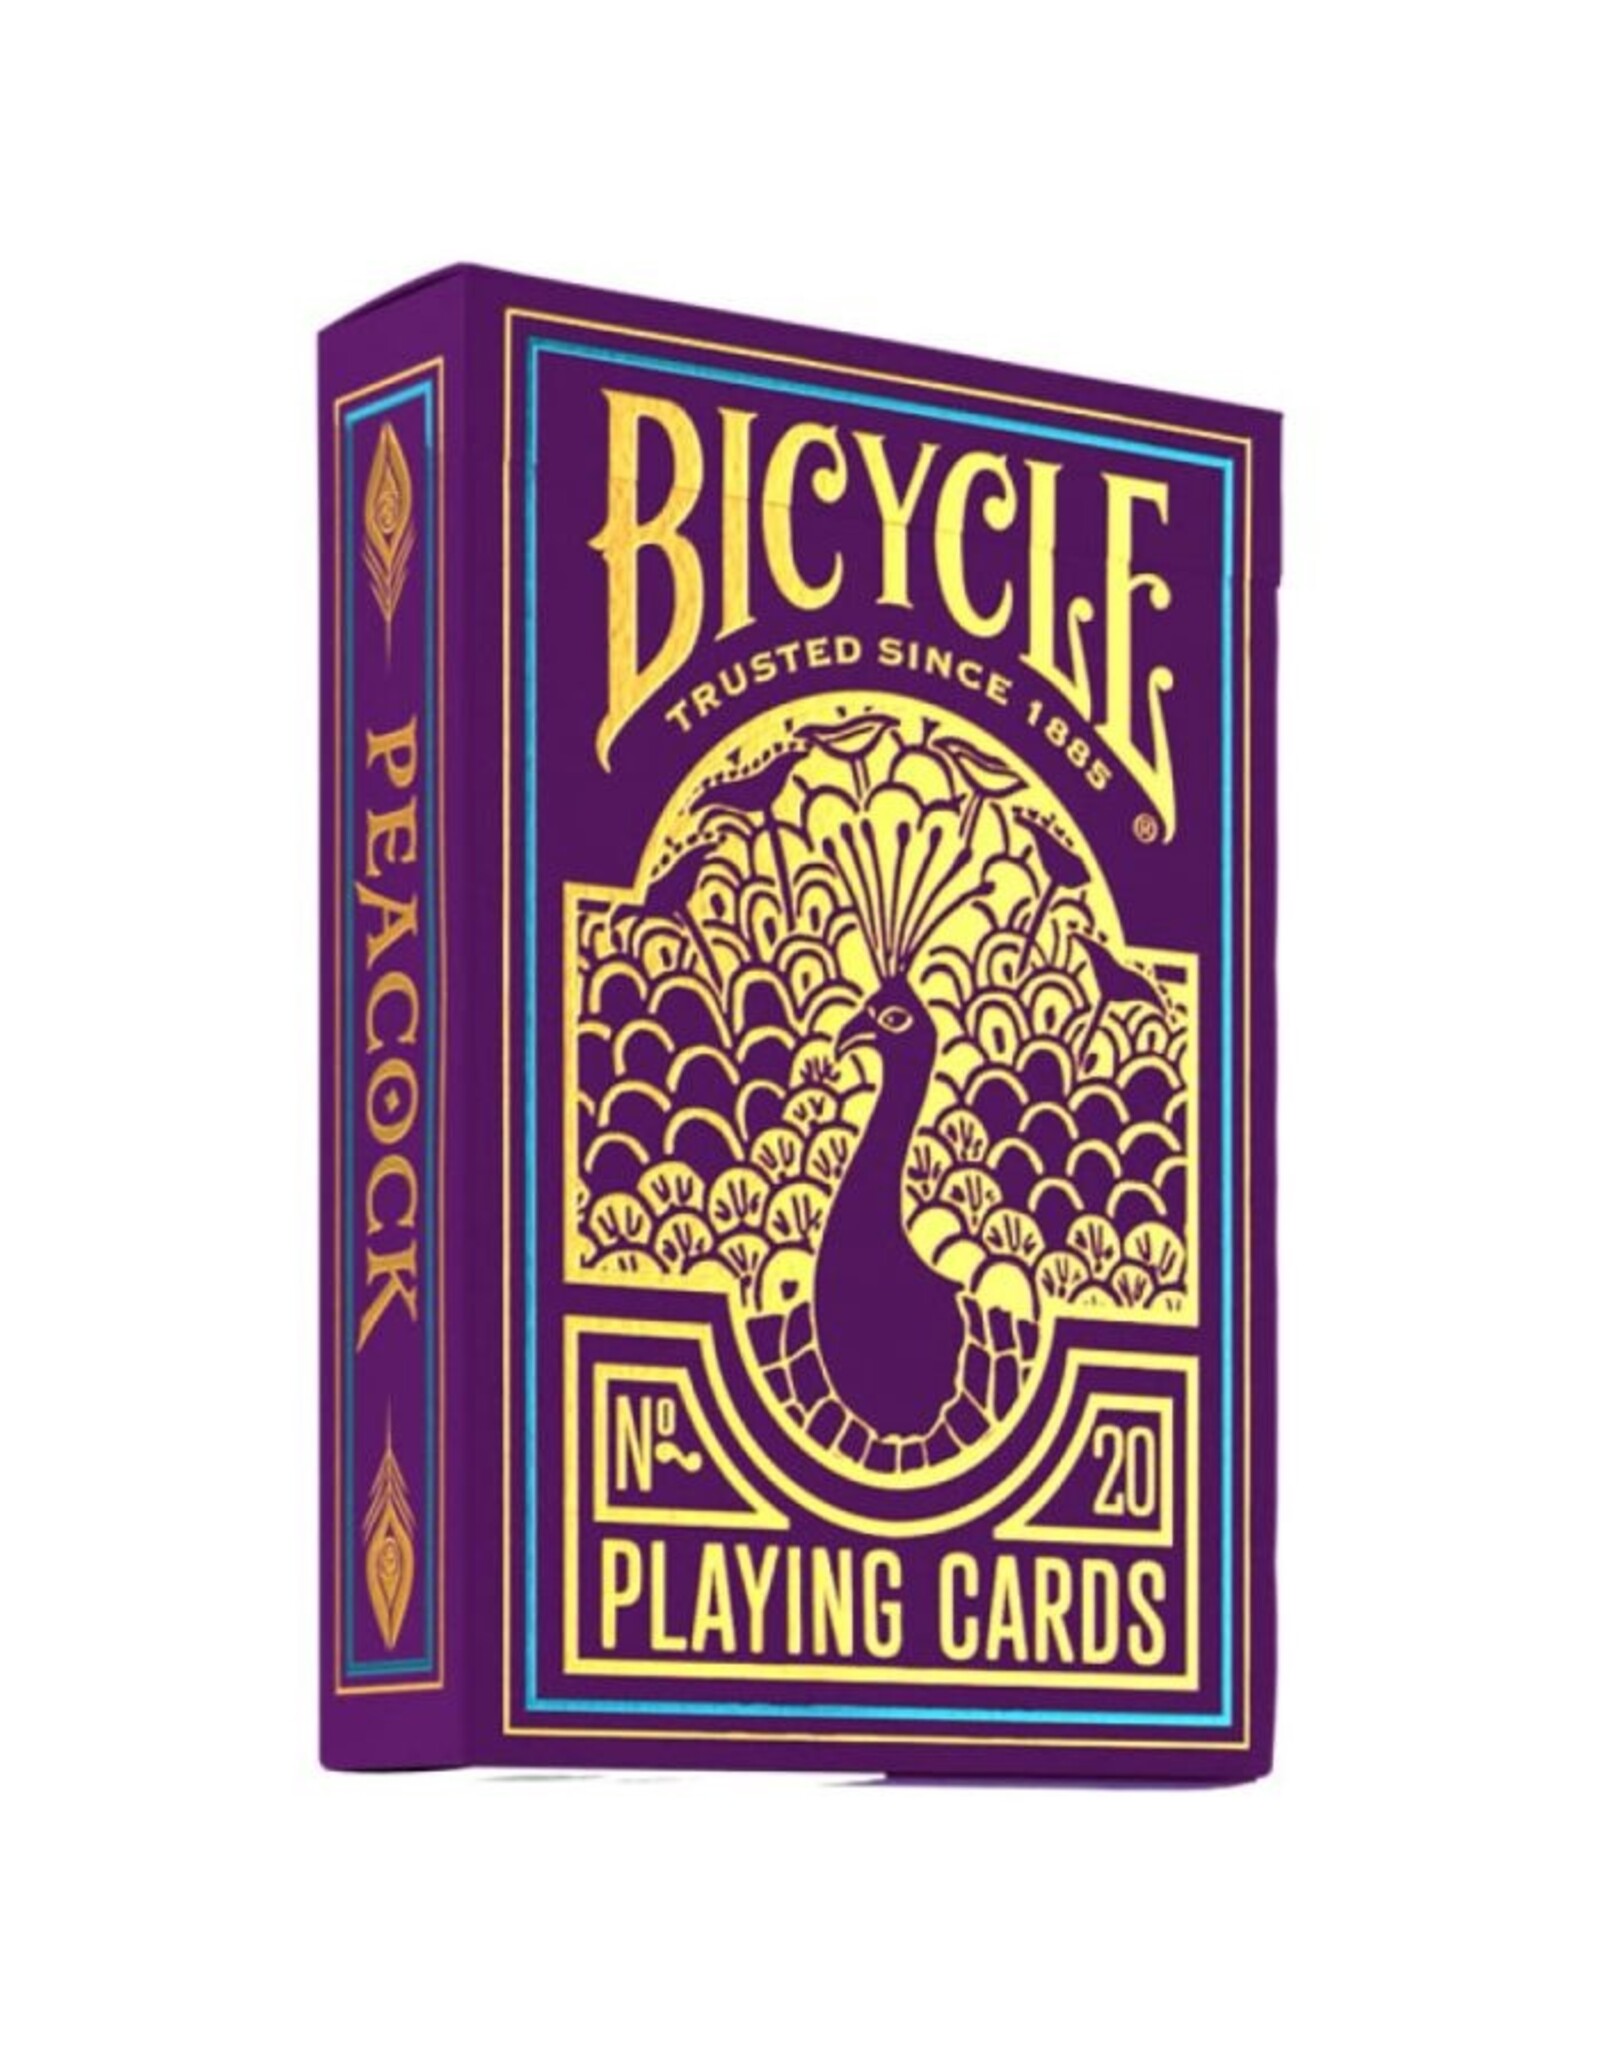 Bicycle Playing Cards: Bicycle: Purple Peacock